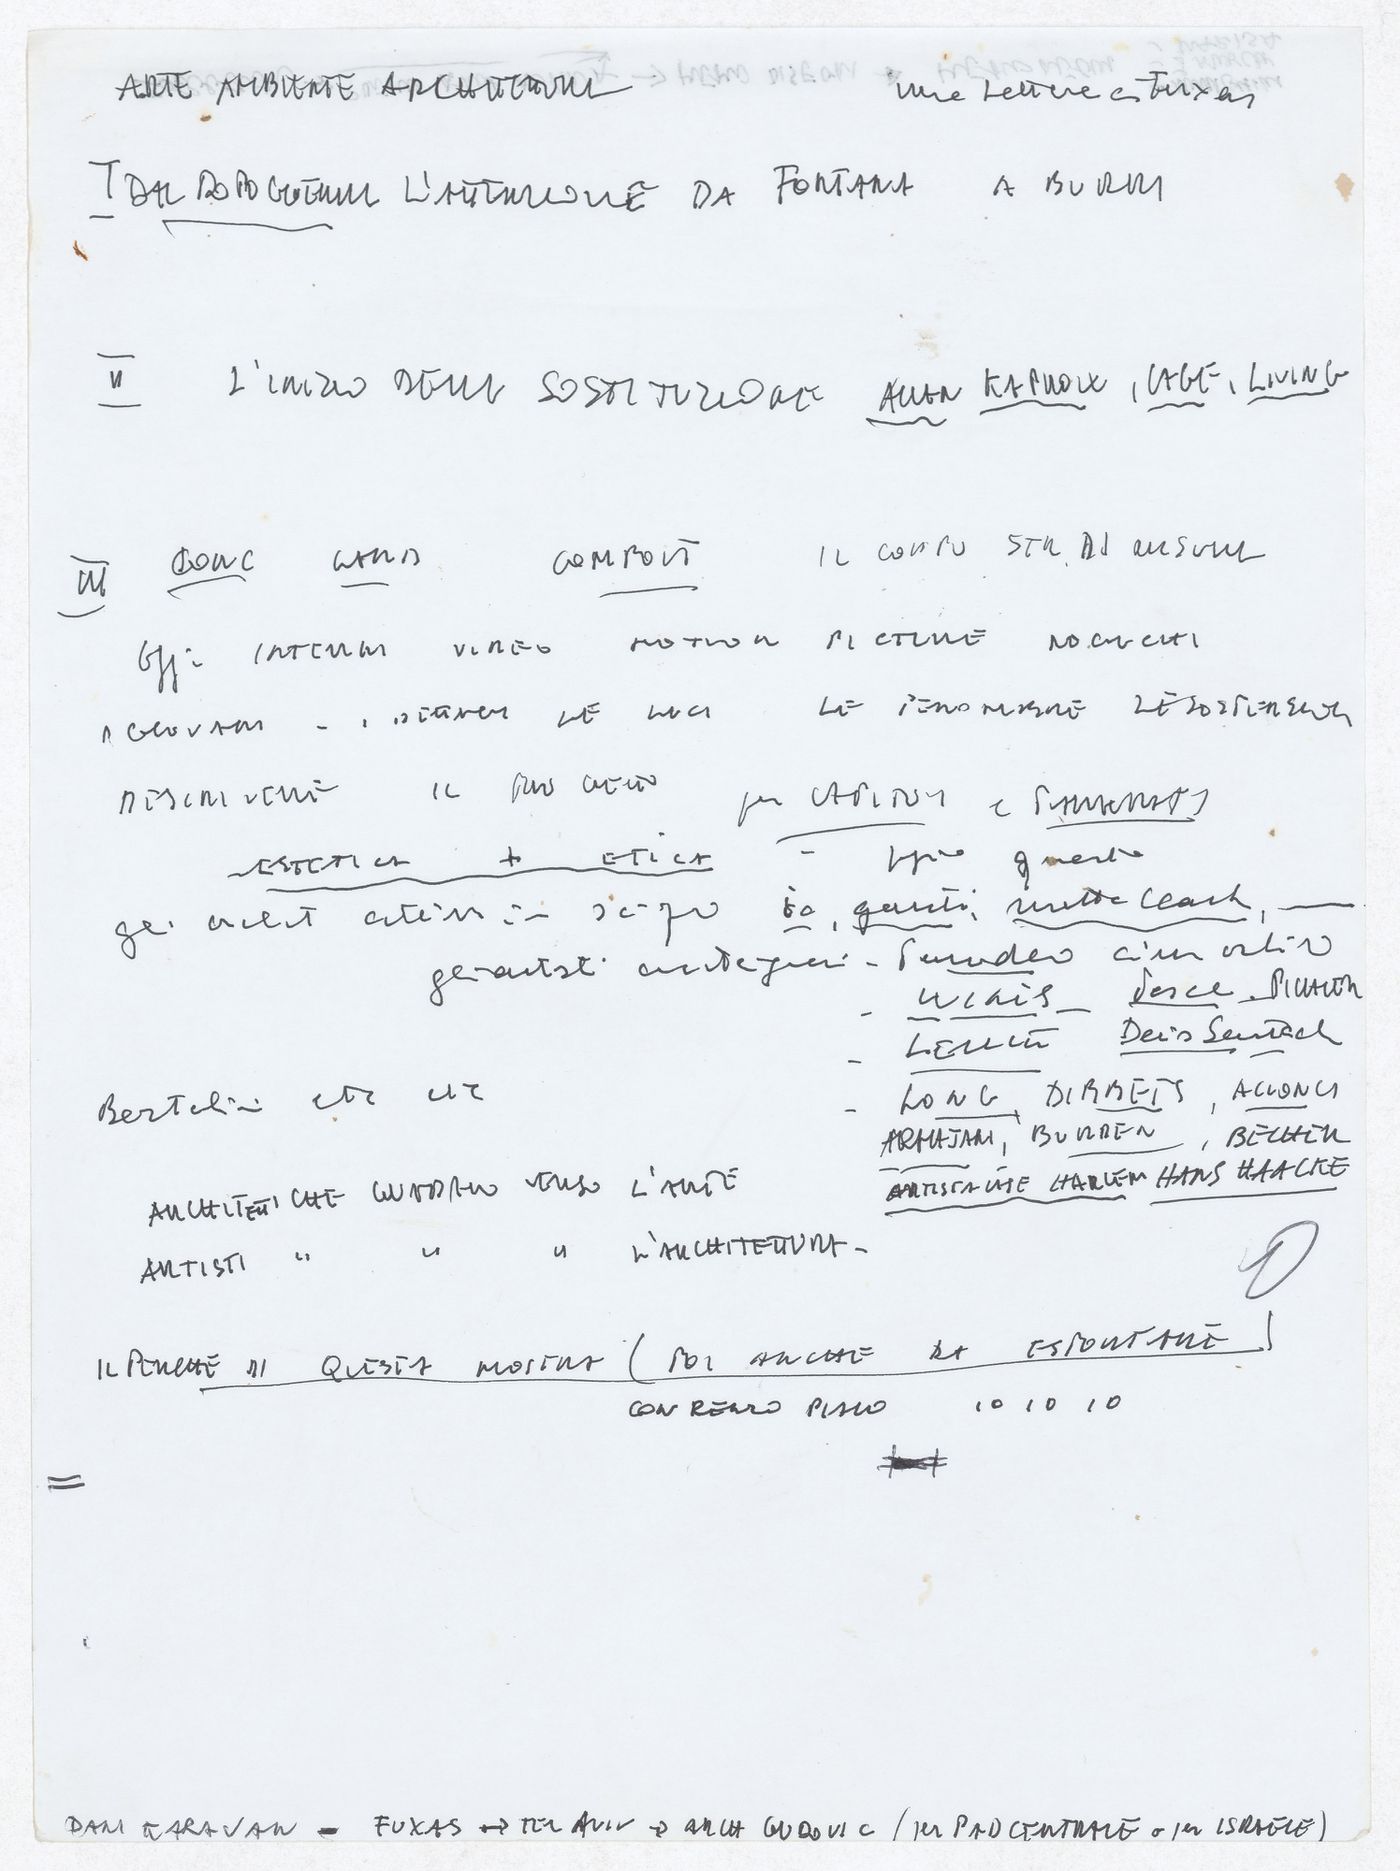 Notes for the exhibition on James Wines at the Venice Biennale; verso: manuscript